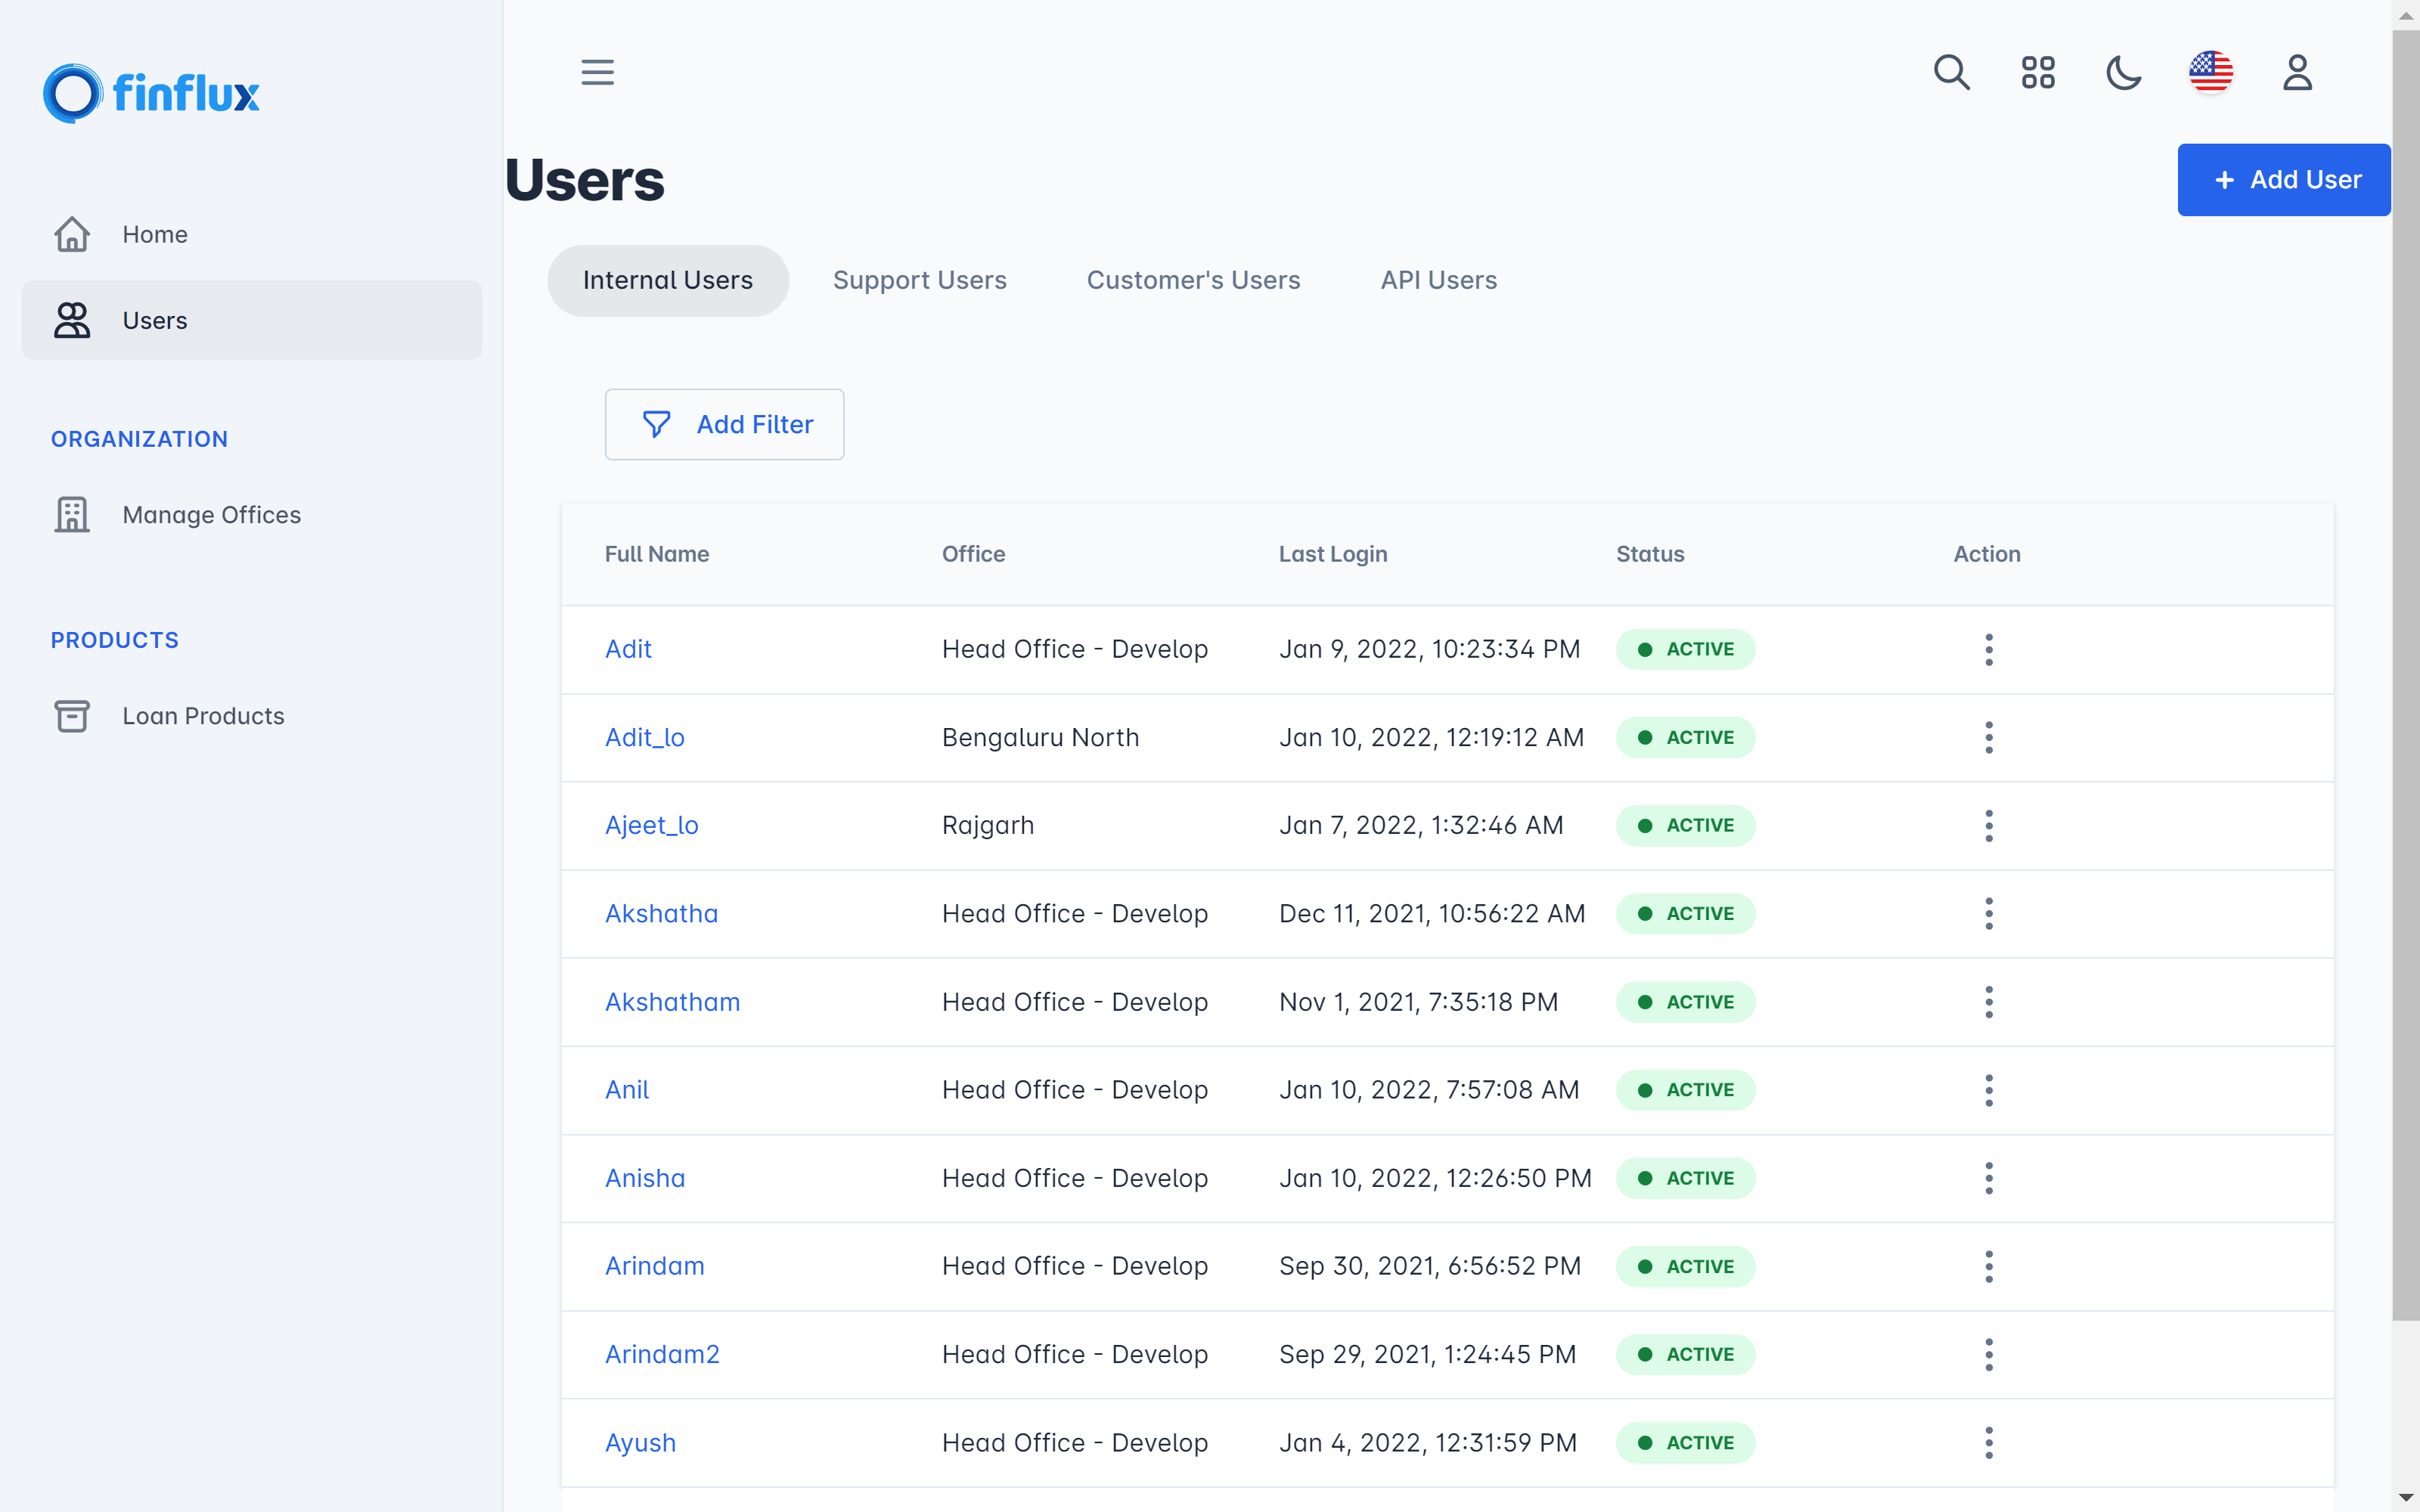 User Dashboard - Contains listicle view of all current users/clients stored in the Finflux Suite.